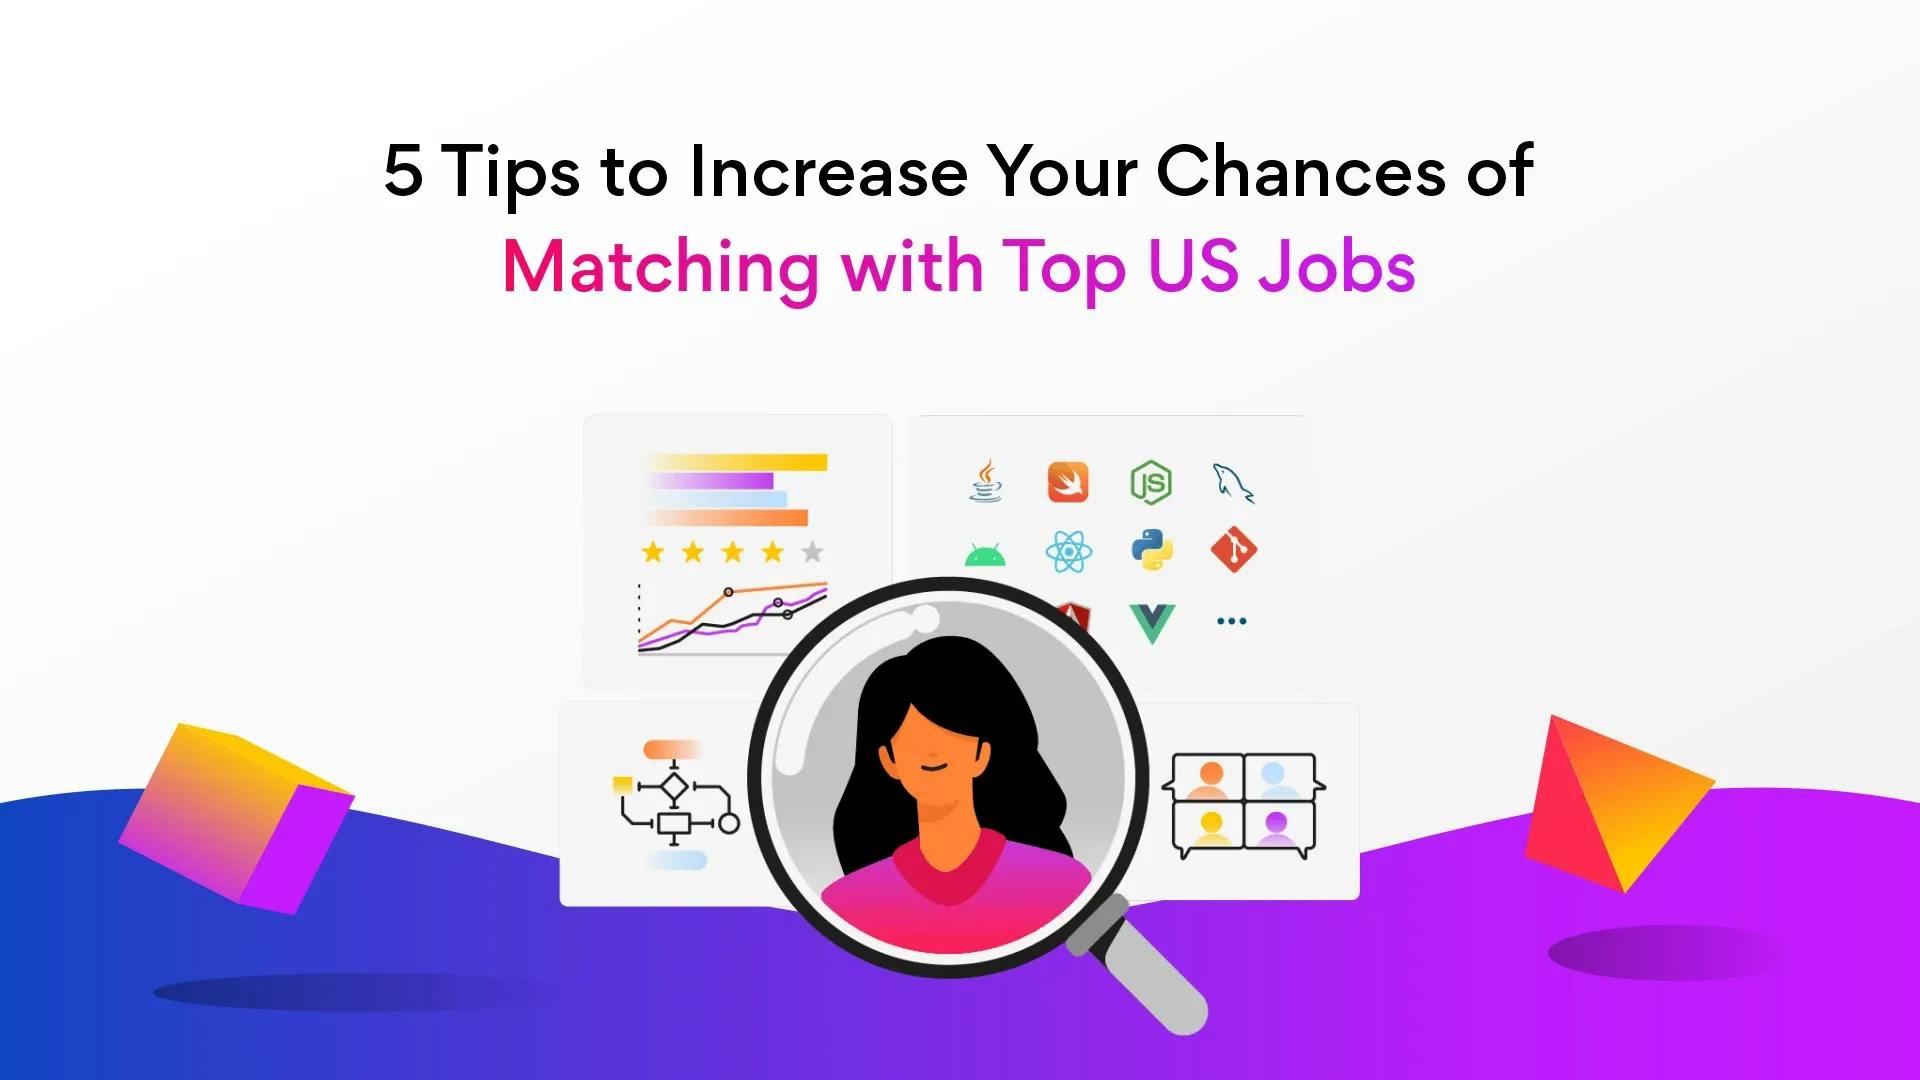 Five Tips to Increase Your Chances of Matching with Top US Jobs